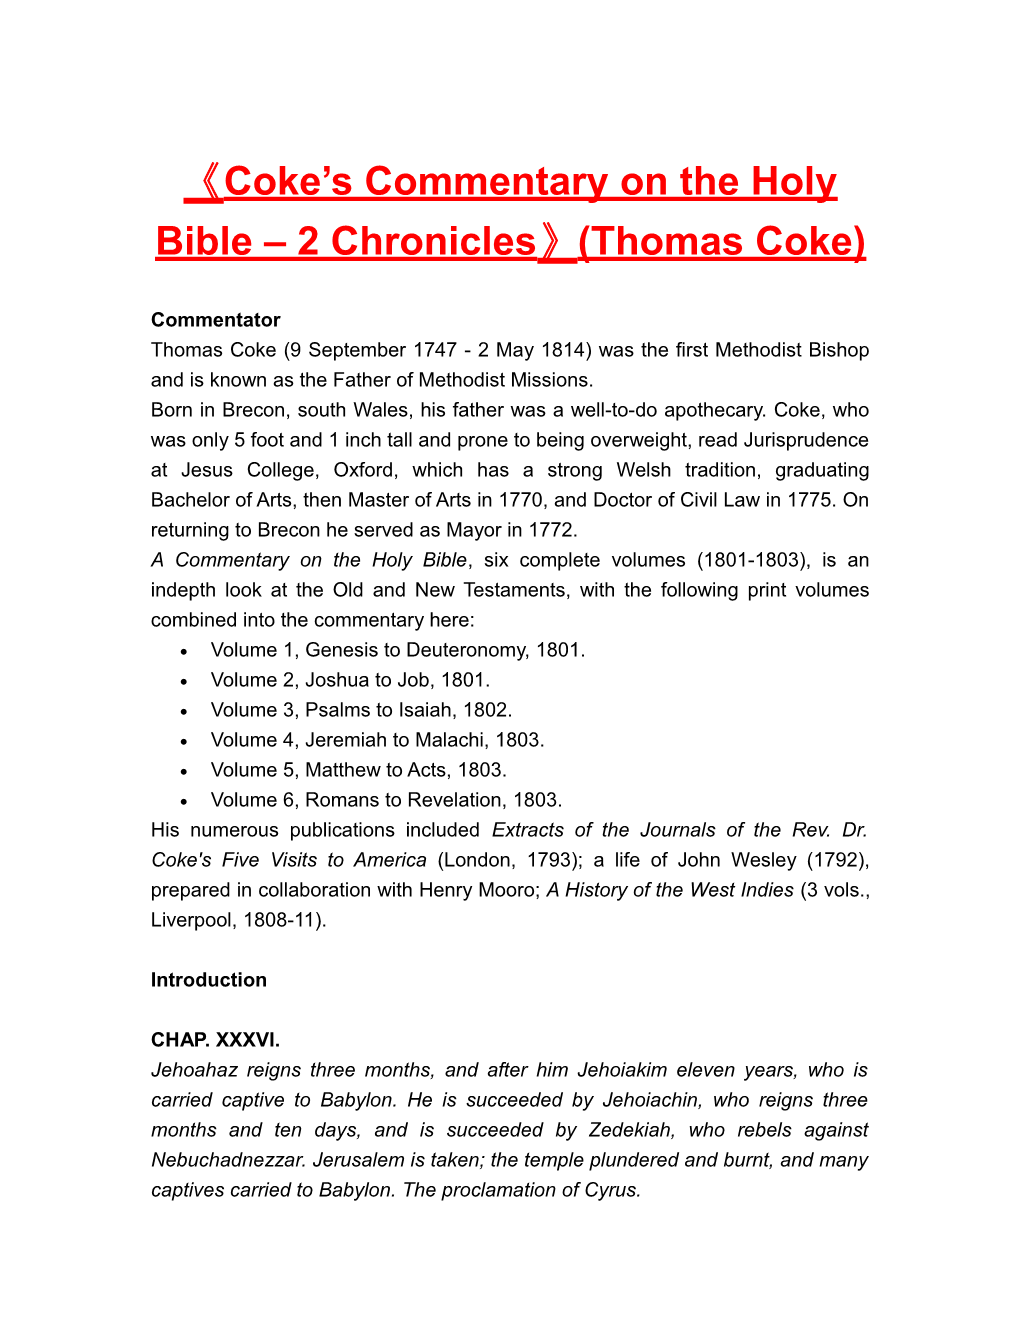 Coke S Commentary on the Holy Bible 2 Chronicles (Thomas Coke)